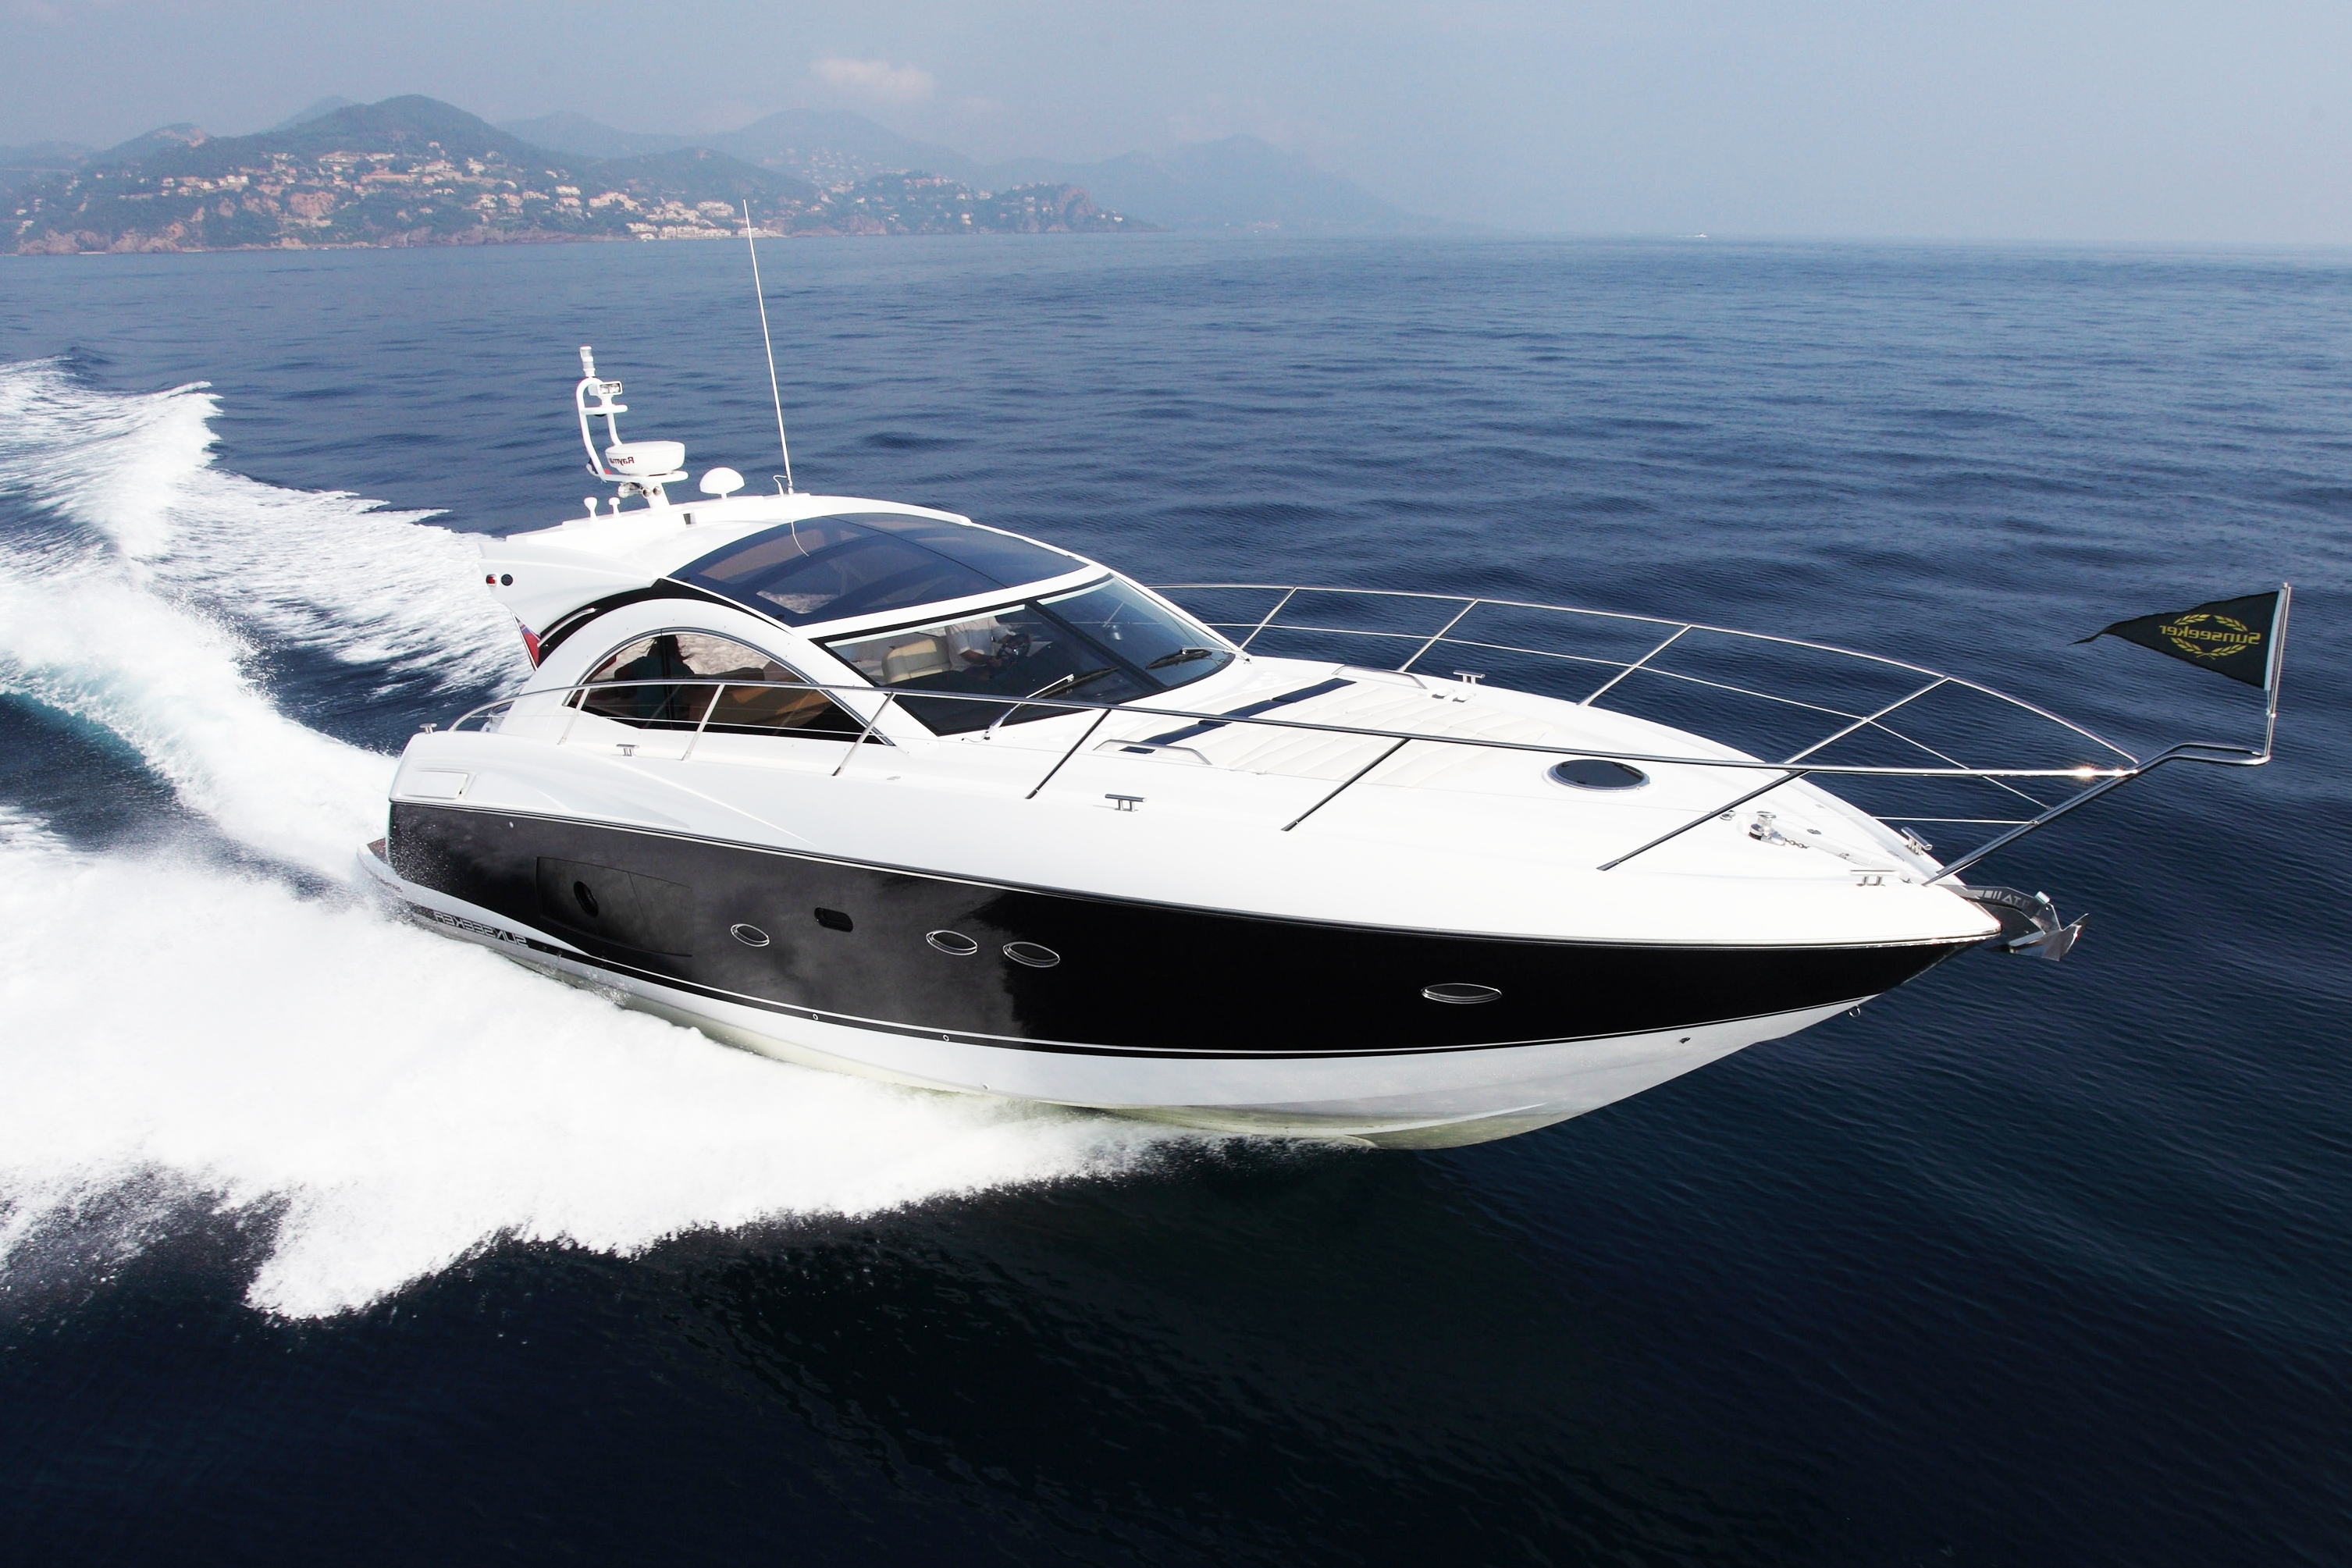 High performance at it's best in the Sunseeker Portofino 48